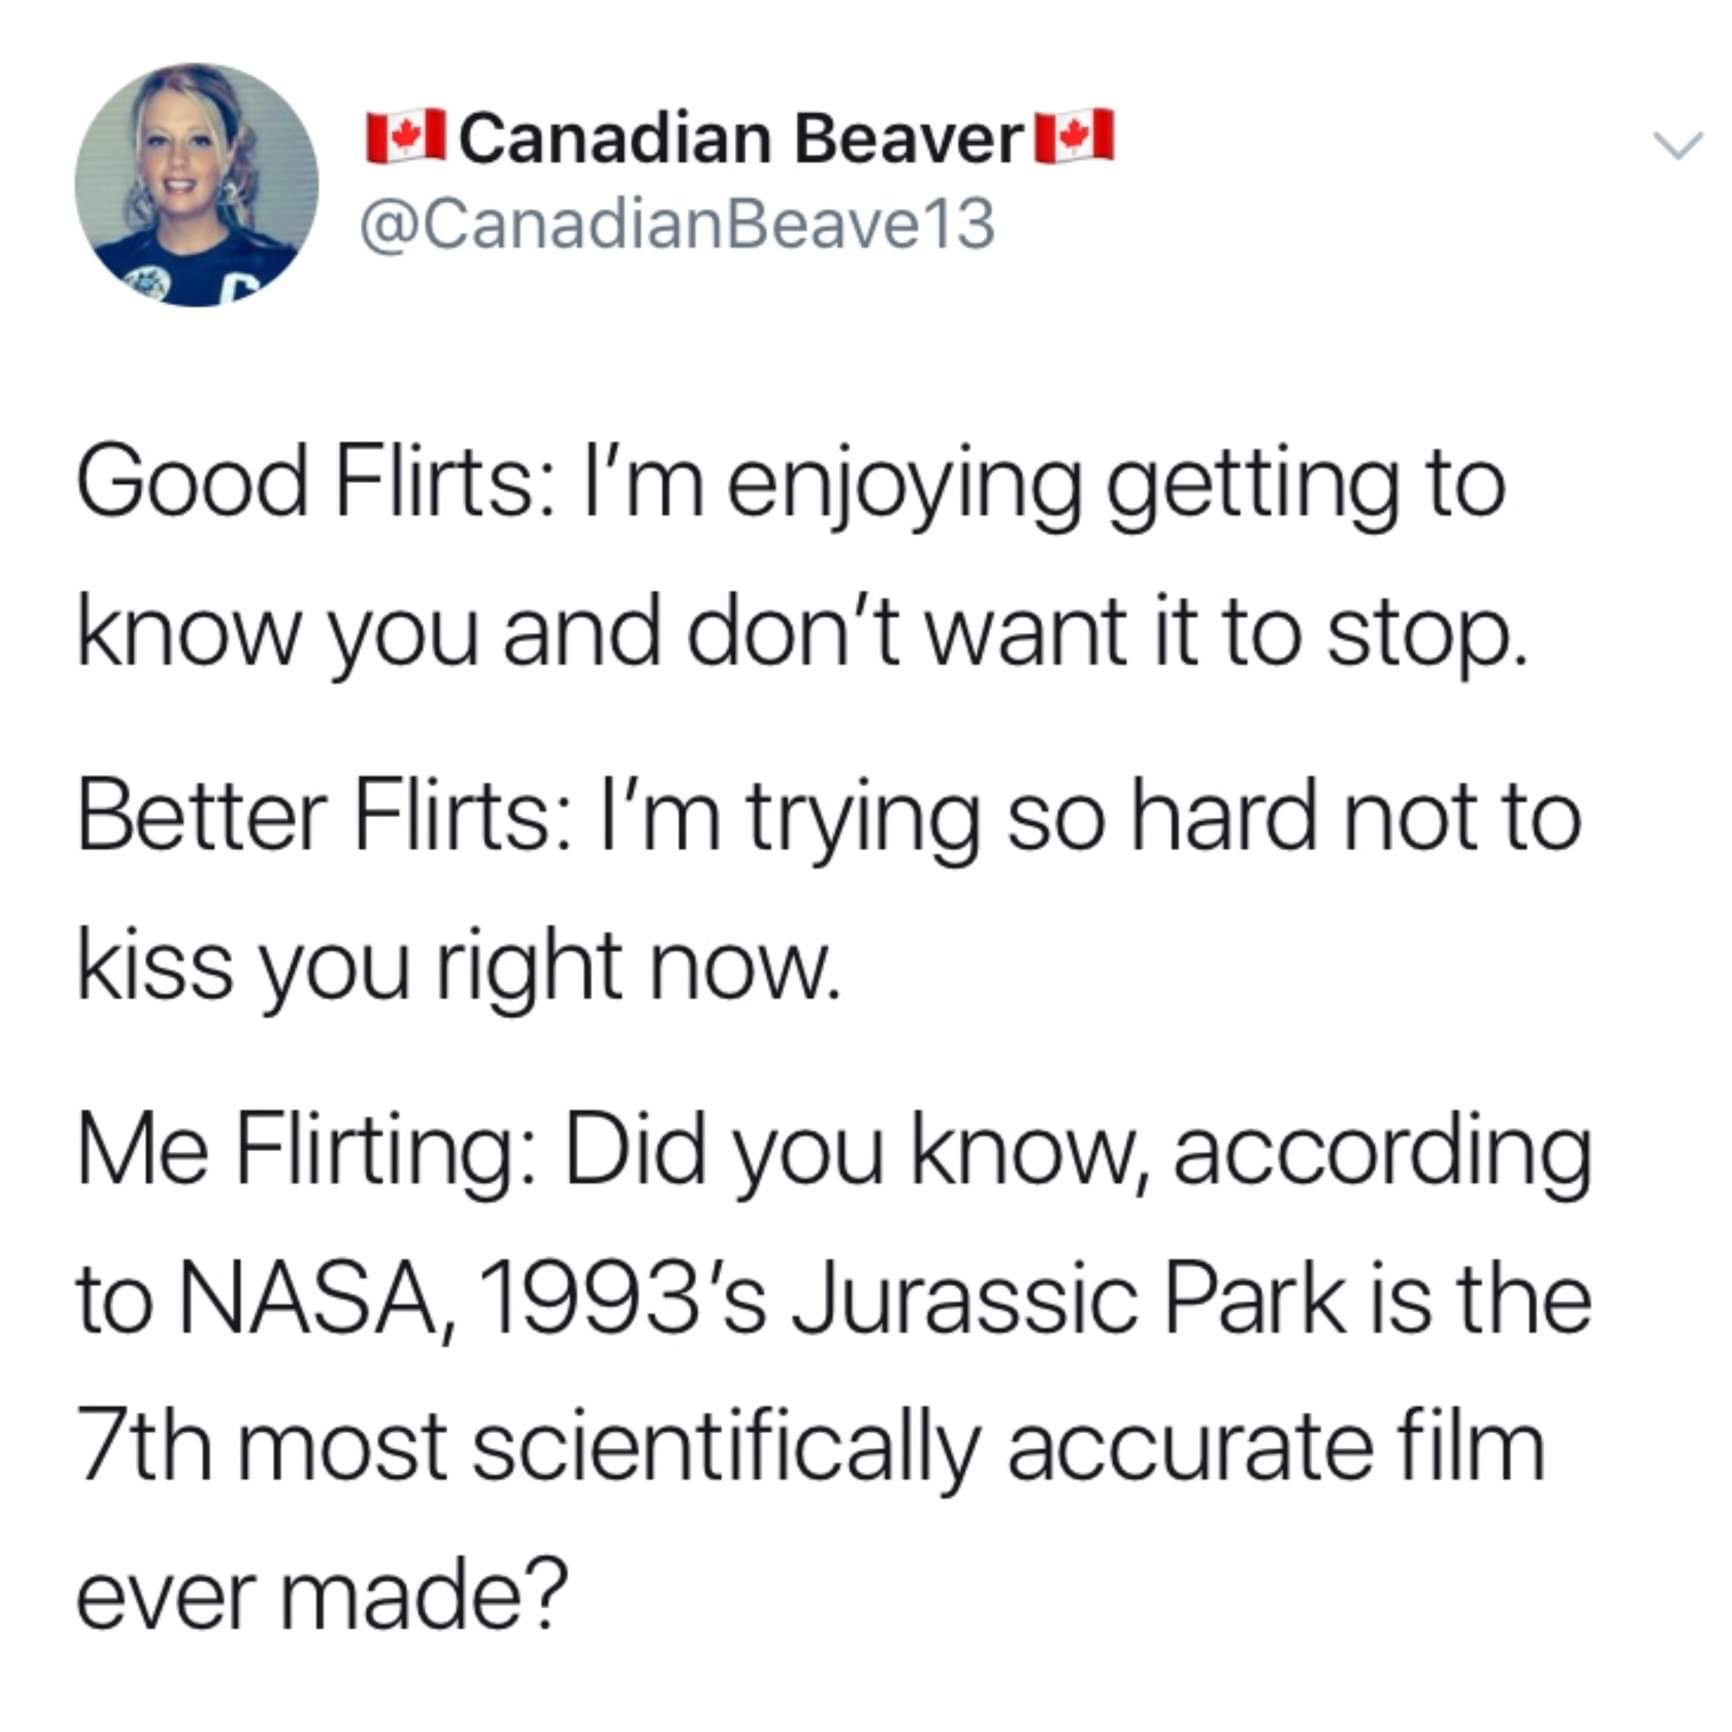 document - Ii Canadian BeaverlI 13 Good Flirts I'm enjoying getting to know you and don't want it to stop. Better Flirts I'm trying so hard not to kiss you right now. Me Flirting Did you know, according to Nasa, 1993's Jurassic Park is the 7th most scient